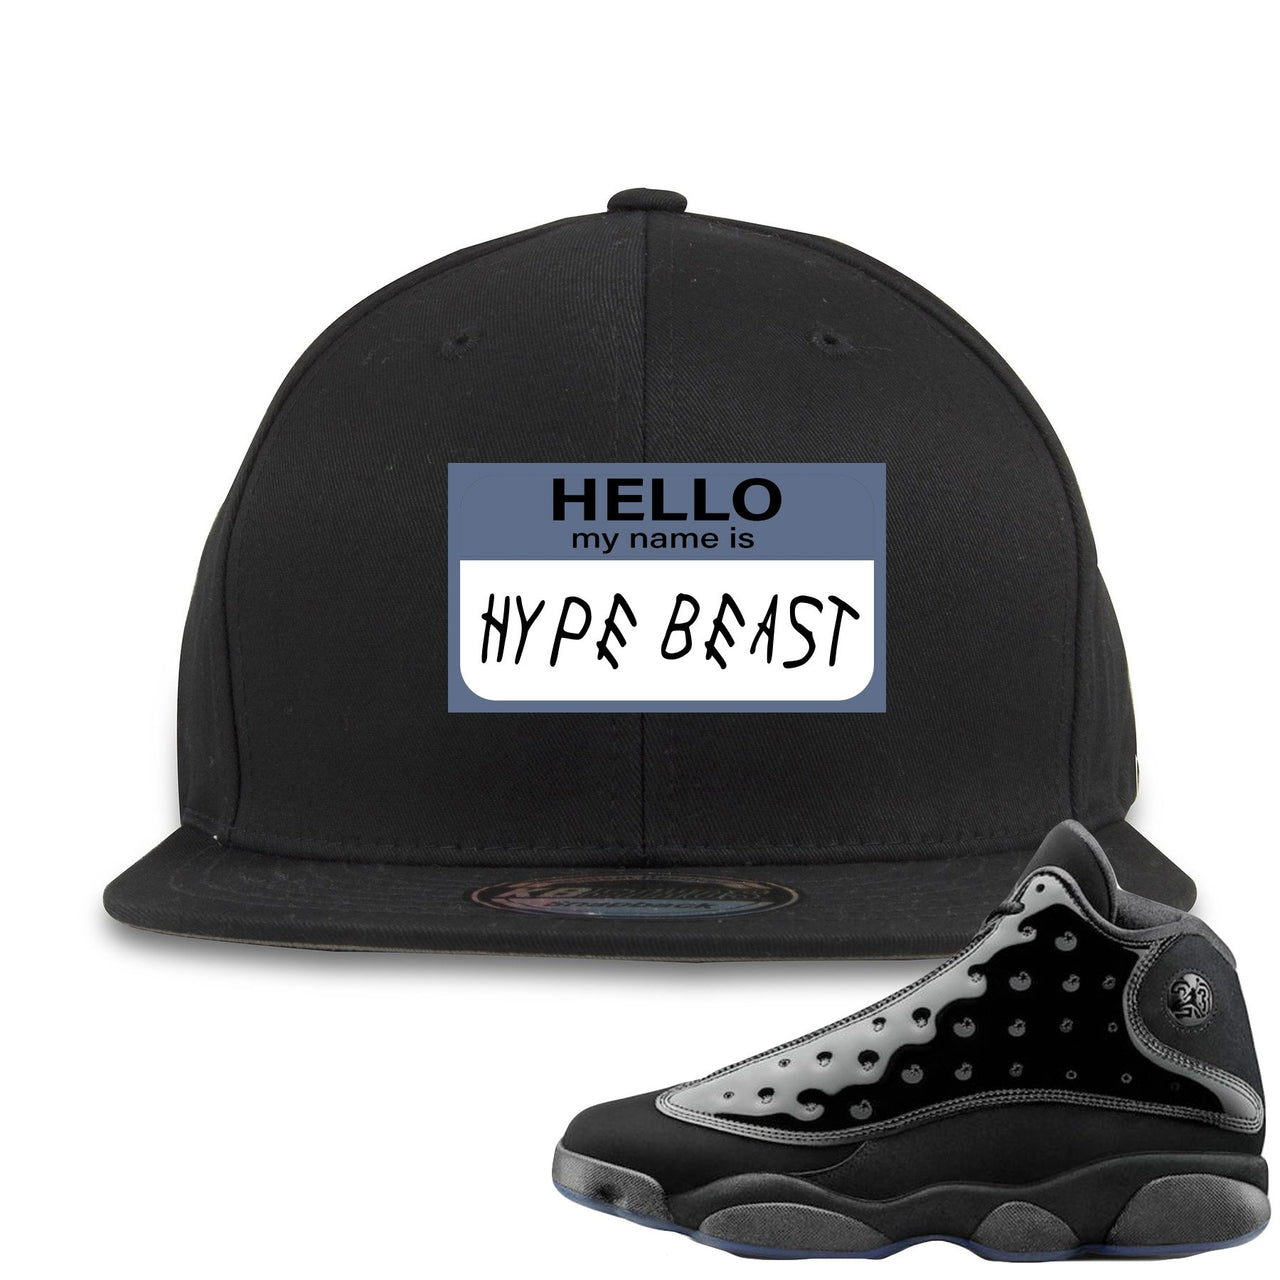 Cap and Gown 13s Snapback | Hello My Name is Hype Beast Woe Style, Black